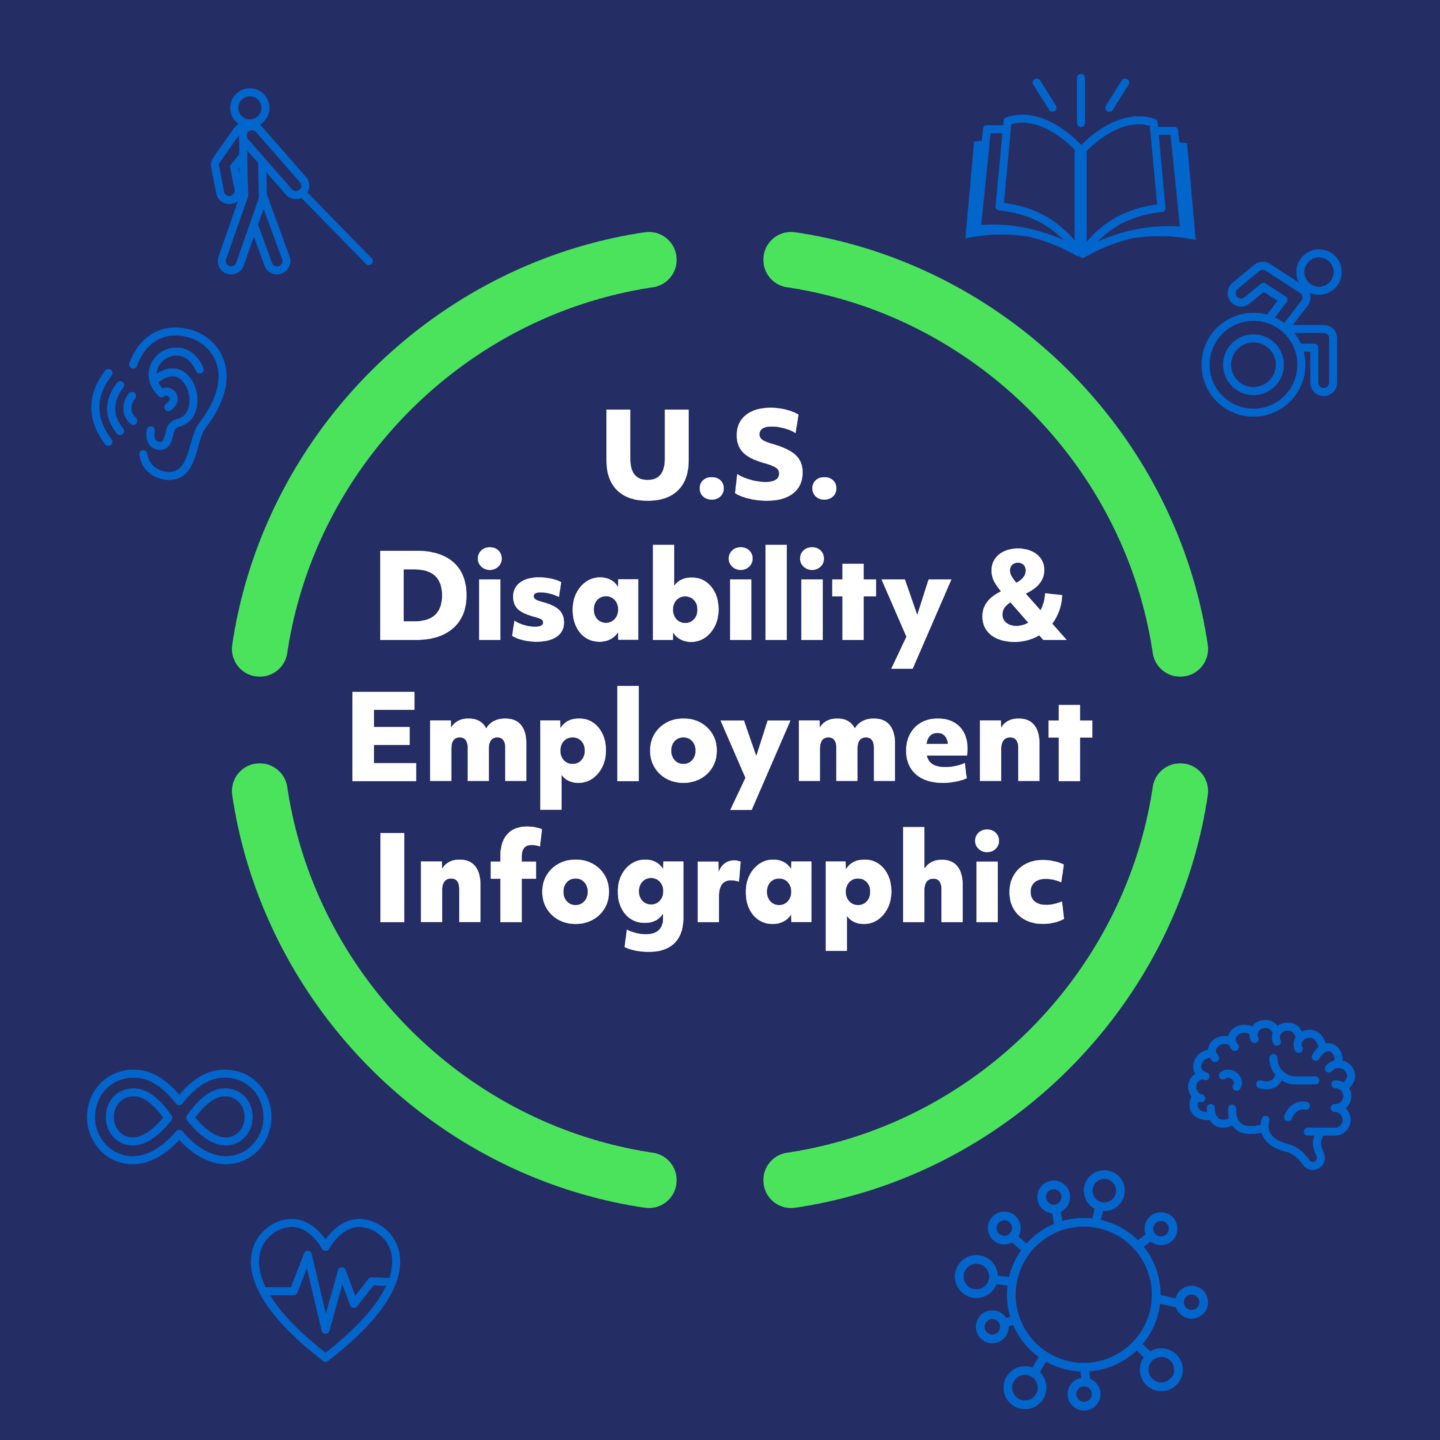 U.S. Disability & Employment Infographic in white text inside of a neon green stenciled circle. In the corners are blue disability icons.